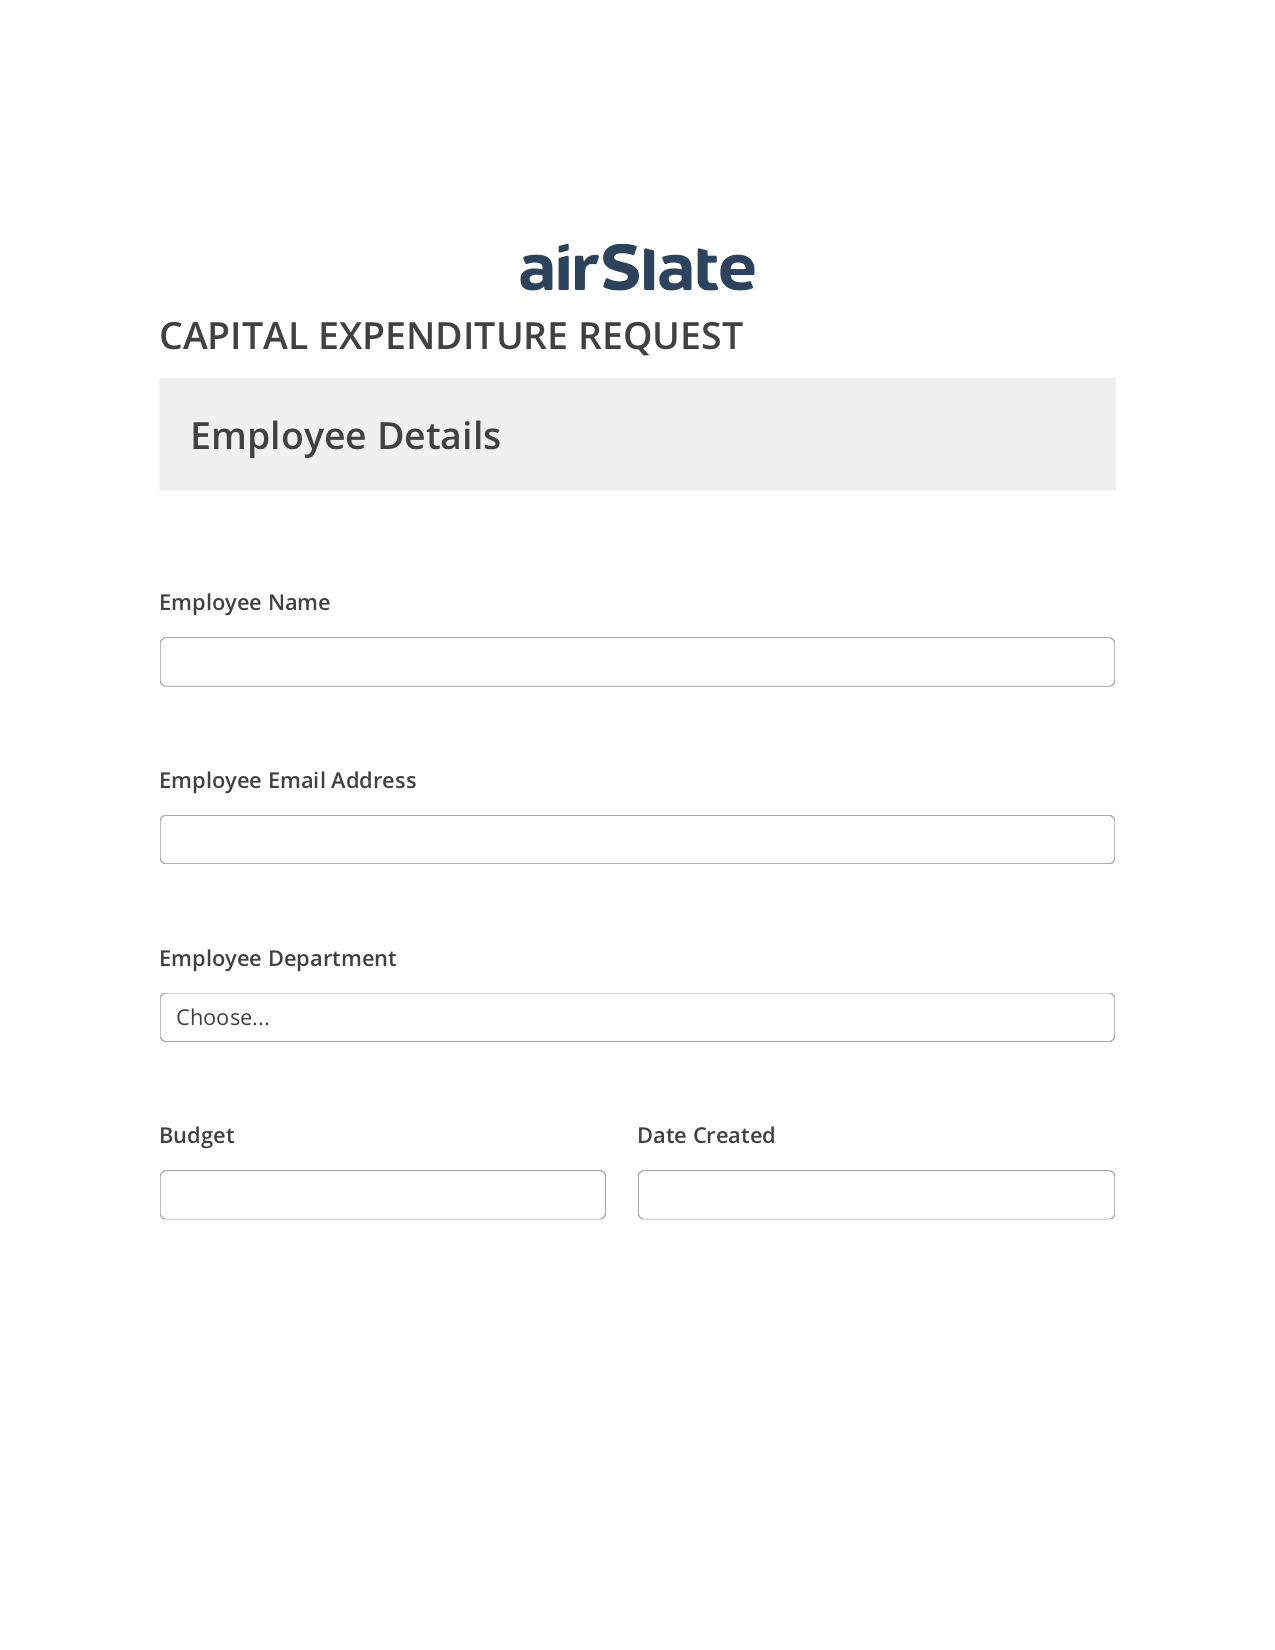 Capital Expenditure Request Approval Workflow Pre-fill from CSV File Dropdown Options Bot, Send a Slate to MS Dynamics 365 Contact Bot, Slack Two-Way Binding Bot